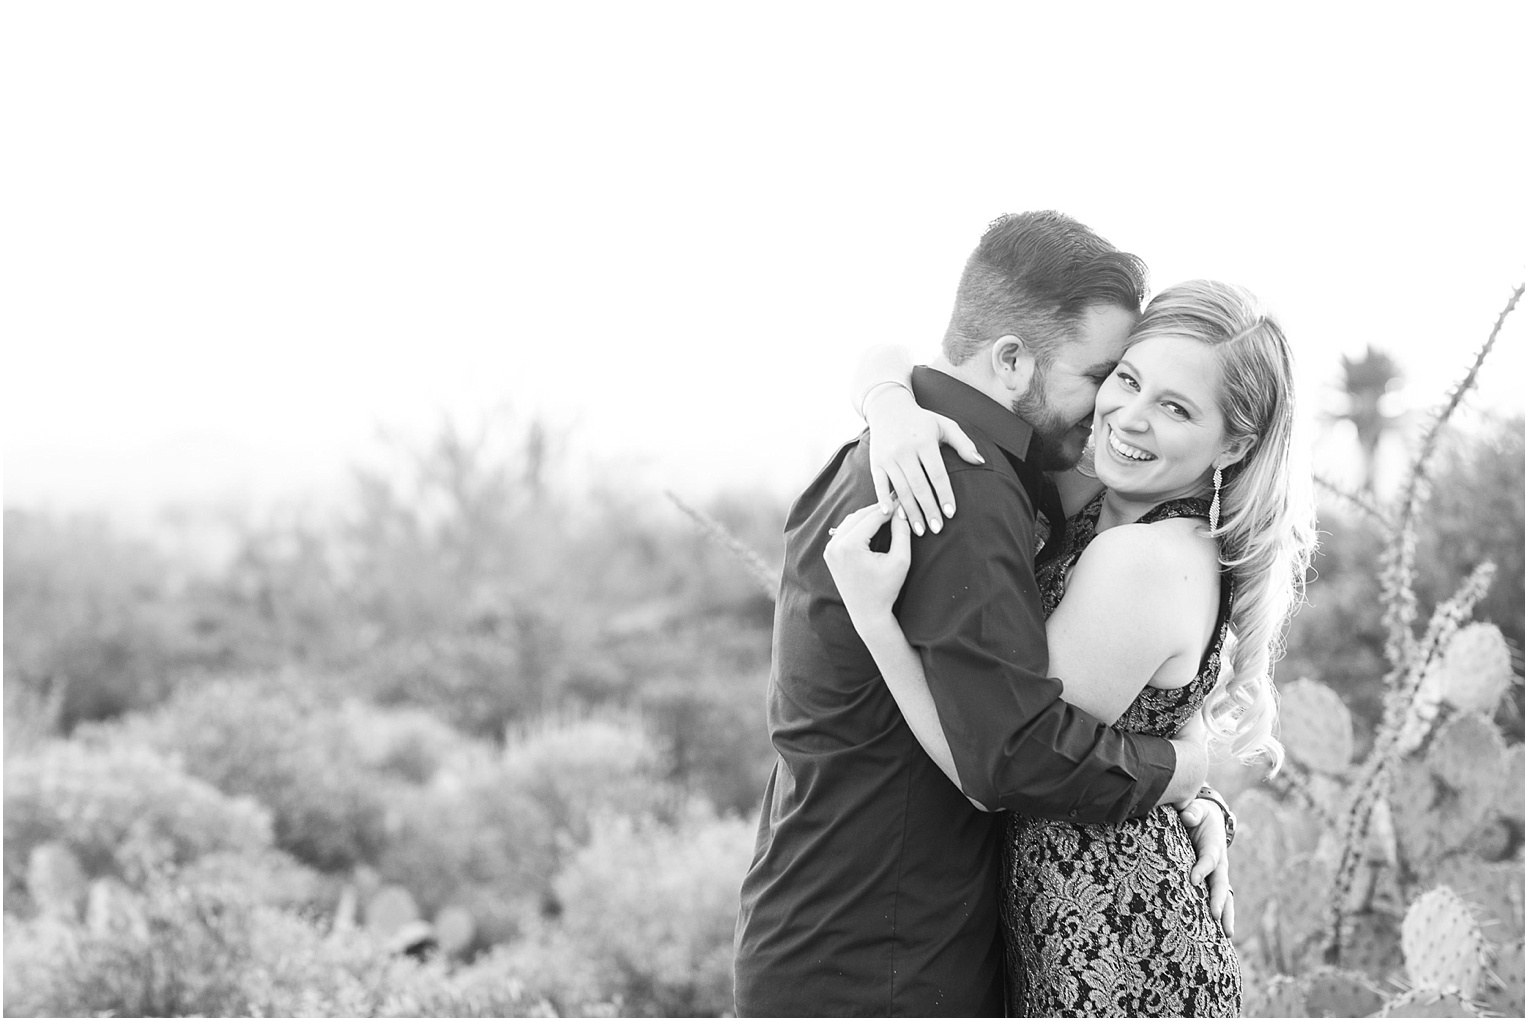 Tucson Engagement Pictures formal engagements session outfits in desert in black and white